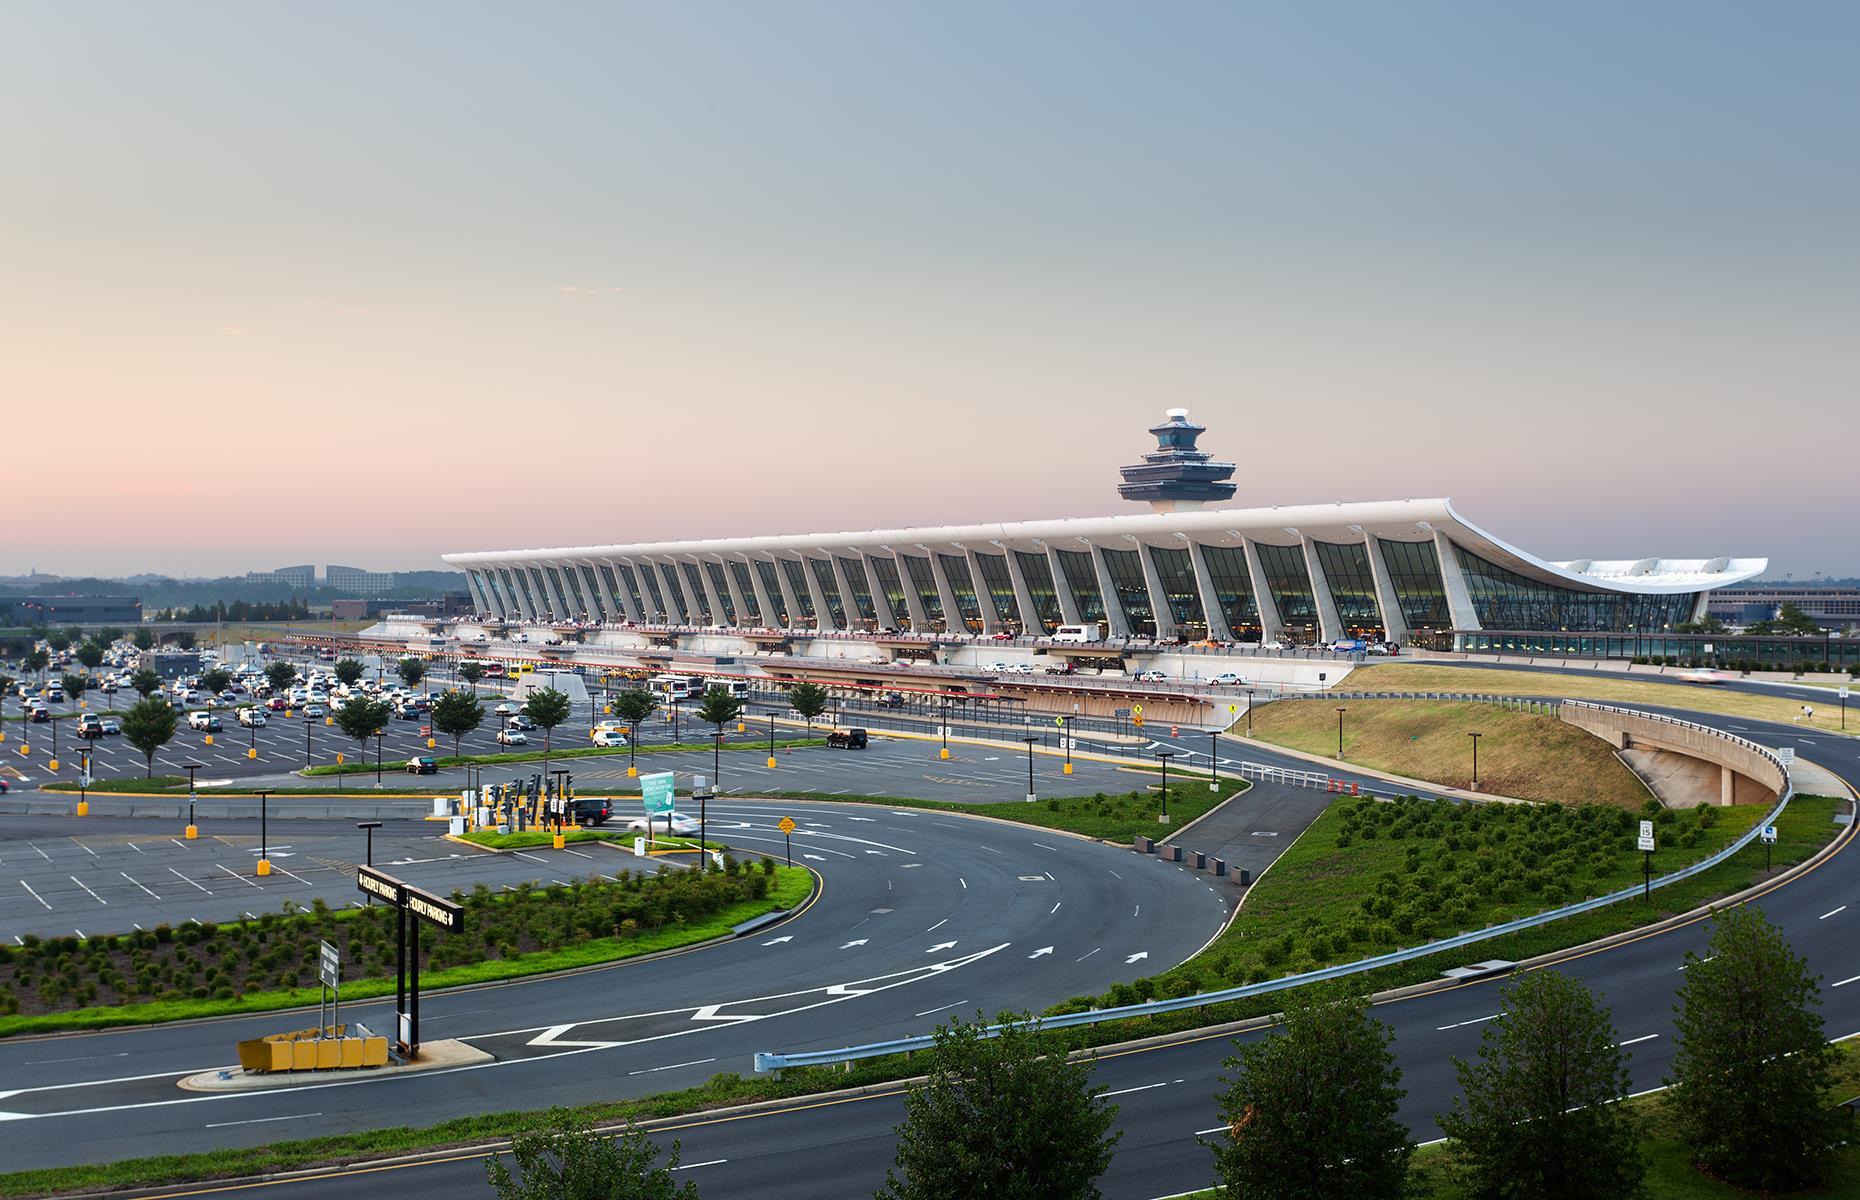 <p>Don't let the name fool you – <a href="https://www.flydulles.com/">Washington Dulles</a>, as it's typically called, isn't all that close to Washington DC. Around 27 miles (43km) from downtown, it takes a while to get to the city, yet the transport hub is popular with travelers, appearing in 12th place on the <a href="https://www.jdpower.com/business/press-releases/2021-north-america-airport-satisfaction-study">J.D. Power’s 2021 Airport Satisfaction Index</a>. Offering direct flights to more than 100 domestic and 58 international destinations, it’s an ideal choice for those wishing to fly in and out of Virginia.</p>  <p><a href="https://www.loveexploring.com/gallerylist/114719/airports-far-away-from-the-place-they-claim-to-serve"><strong>These airports are surprisingly far from the cities they claim to serve</strong></a></p>